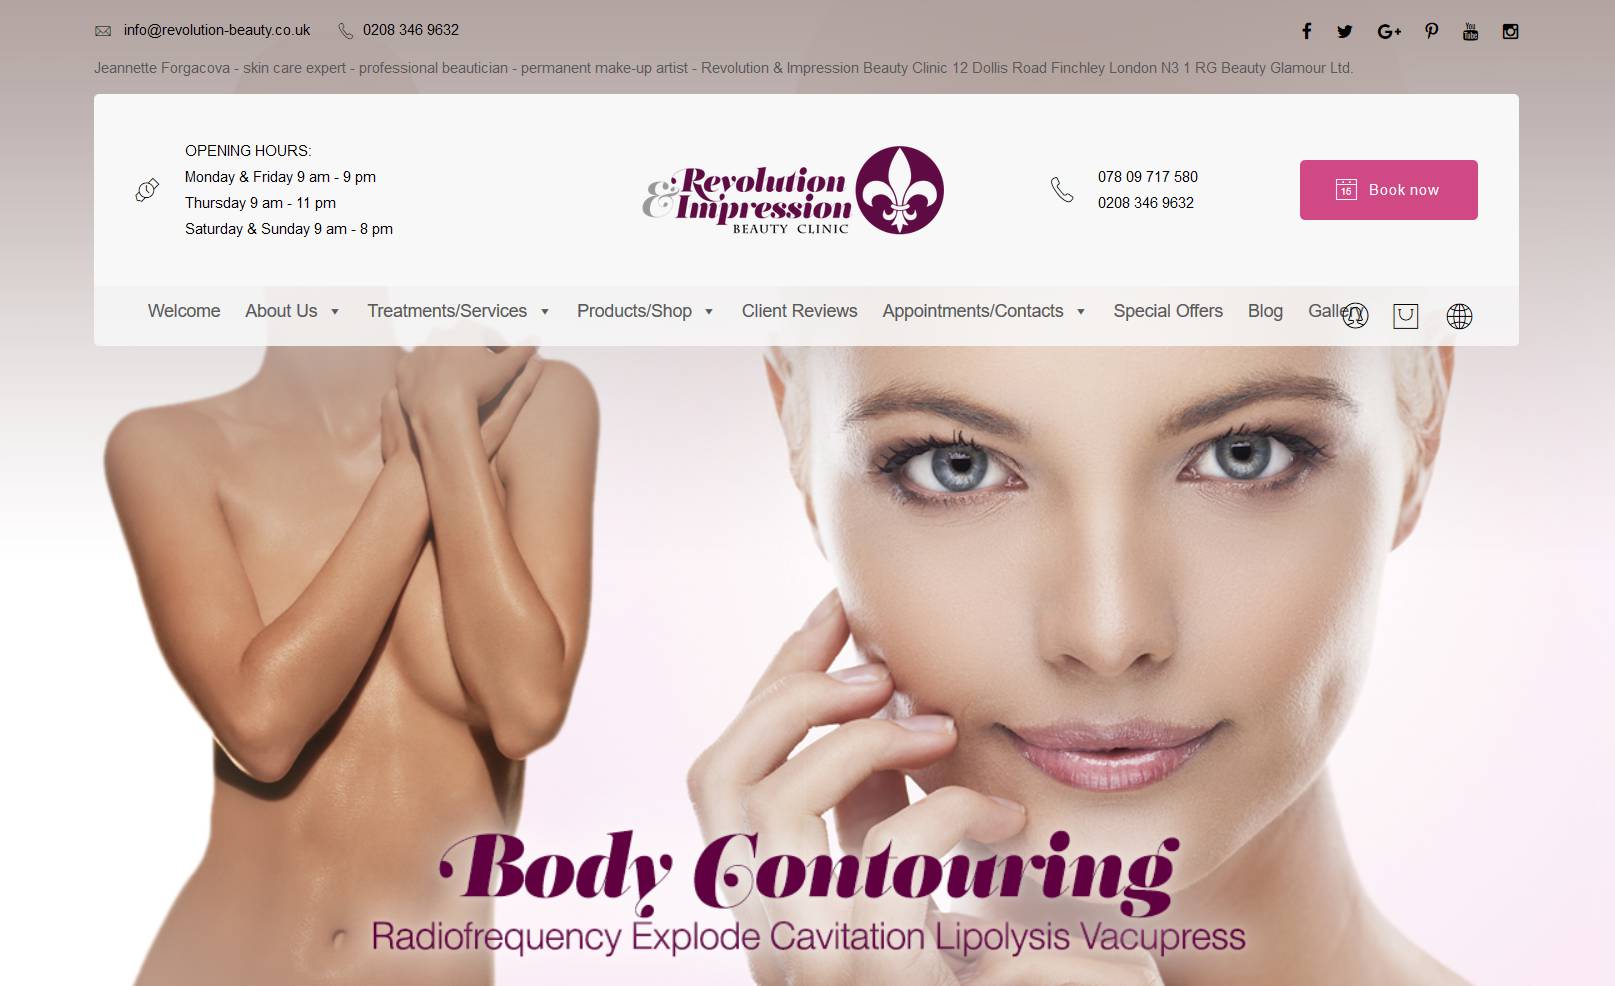 beauty-clinic-banner-image-4